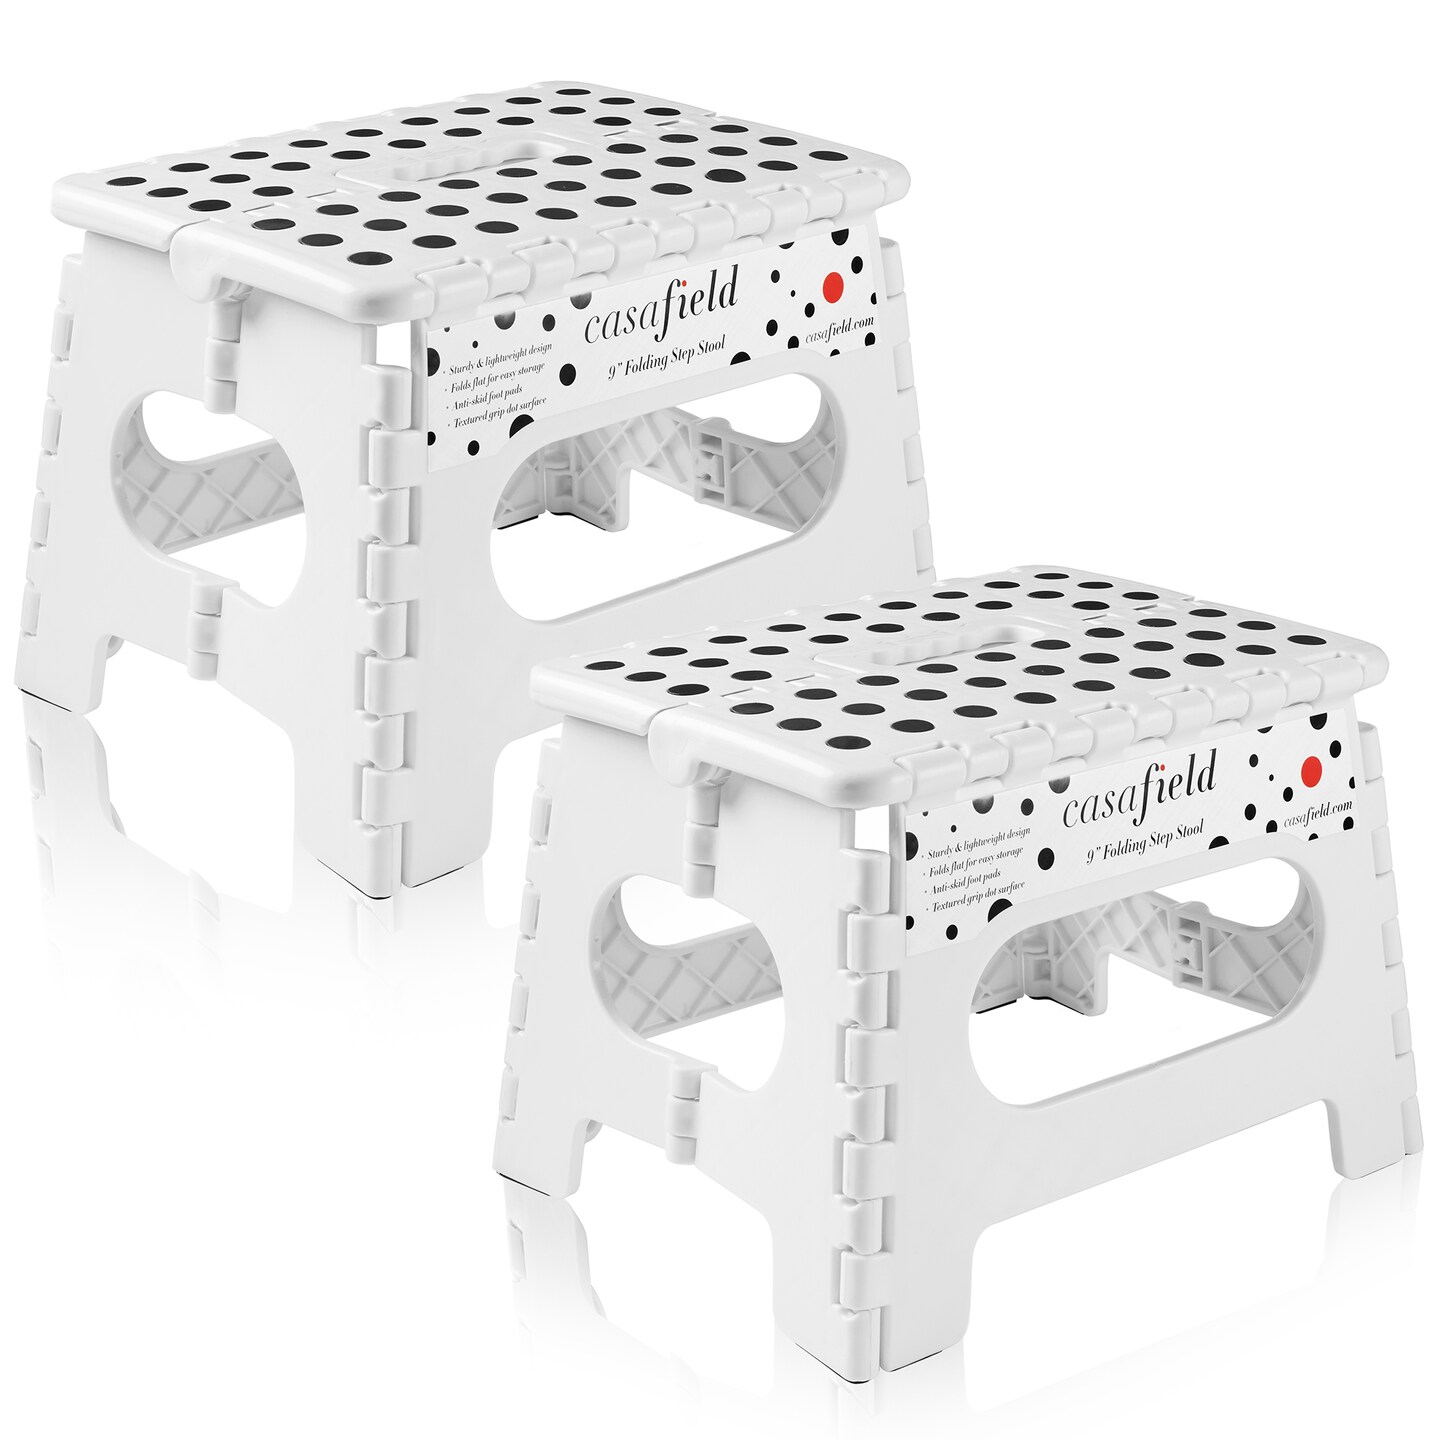 Casafield Folding Step Stools with Handle (Set of 2) - Portable Collapsible Small Plastic Foot Stool - Use in the Kitchen, Bathroom and Bedroom